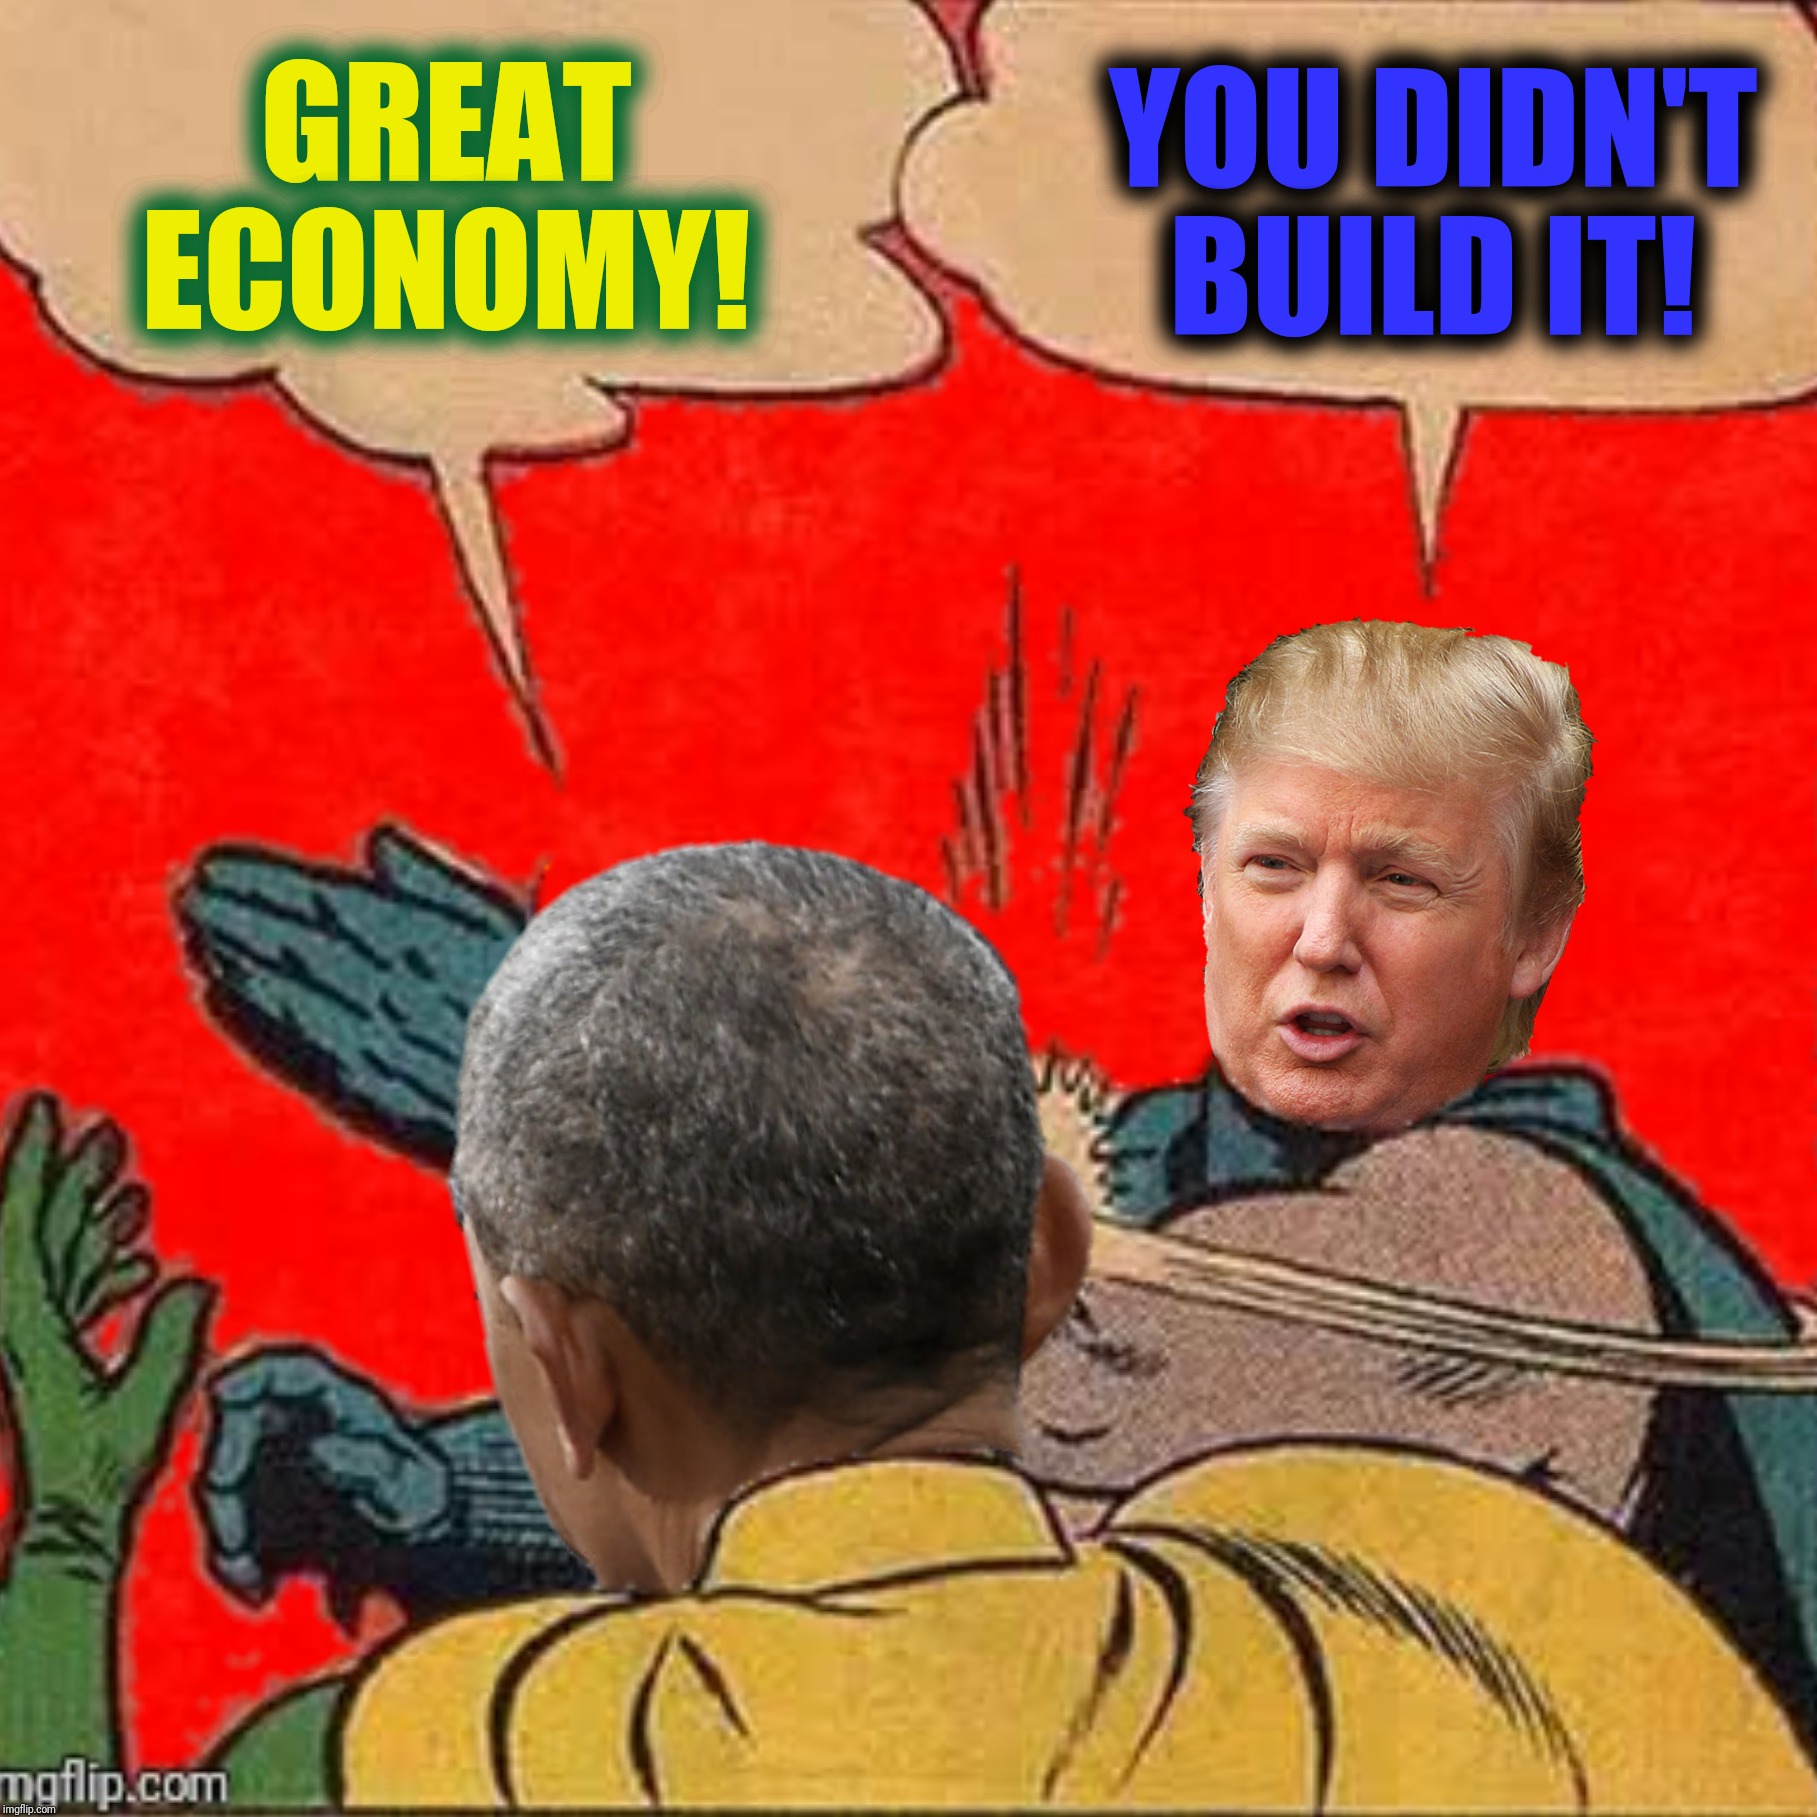 Here's your wand! | GREAT ECONOMY! YOU DIDN'T BUILD IT! | image tagged in bad photoshop,batman slapping robin,trump slapping obama,donald trump,barack obama | made w/ Imgflip meme maker